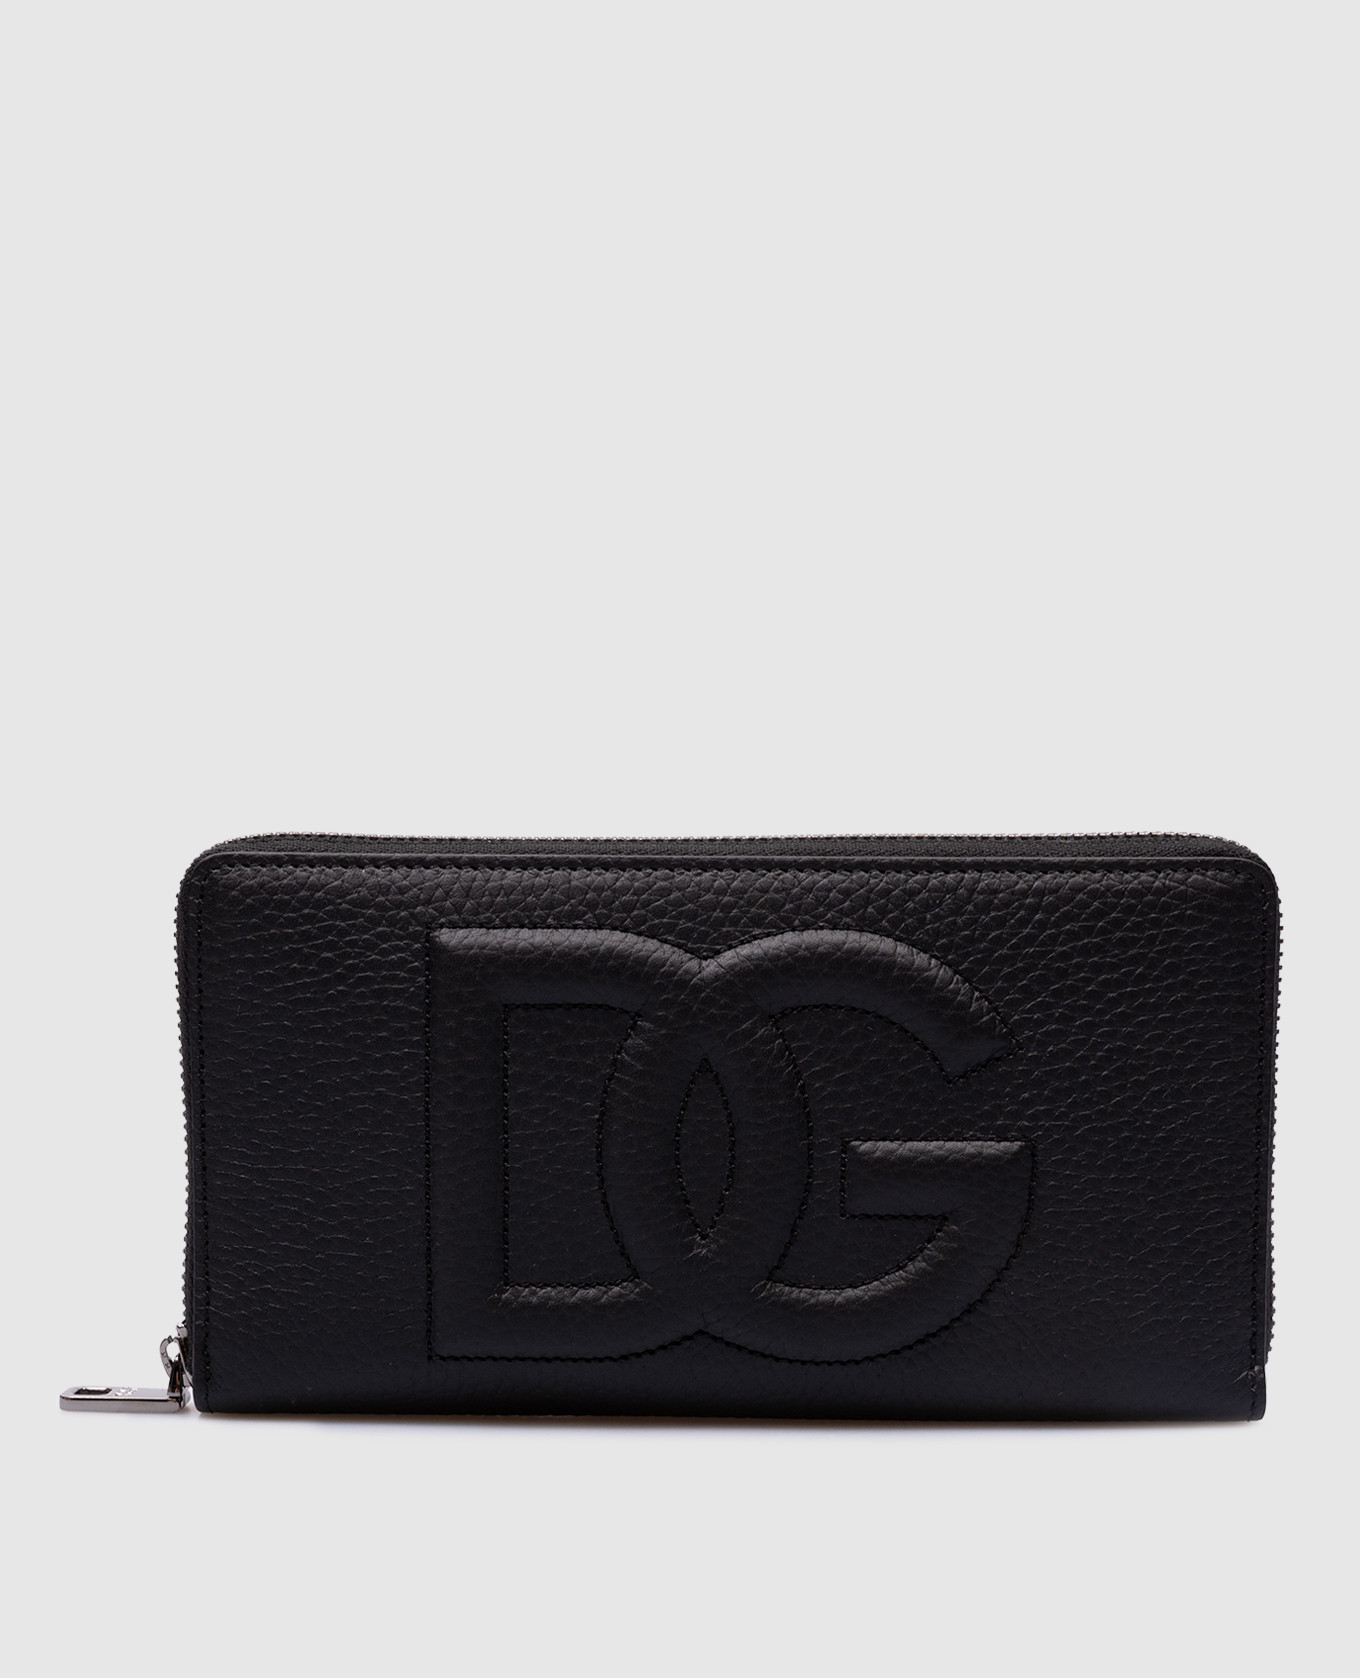 Black leather wallet with textured DG logo